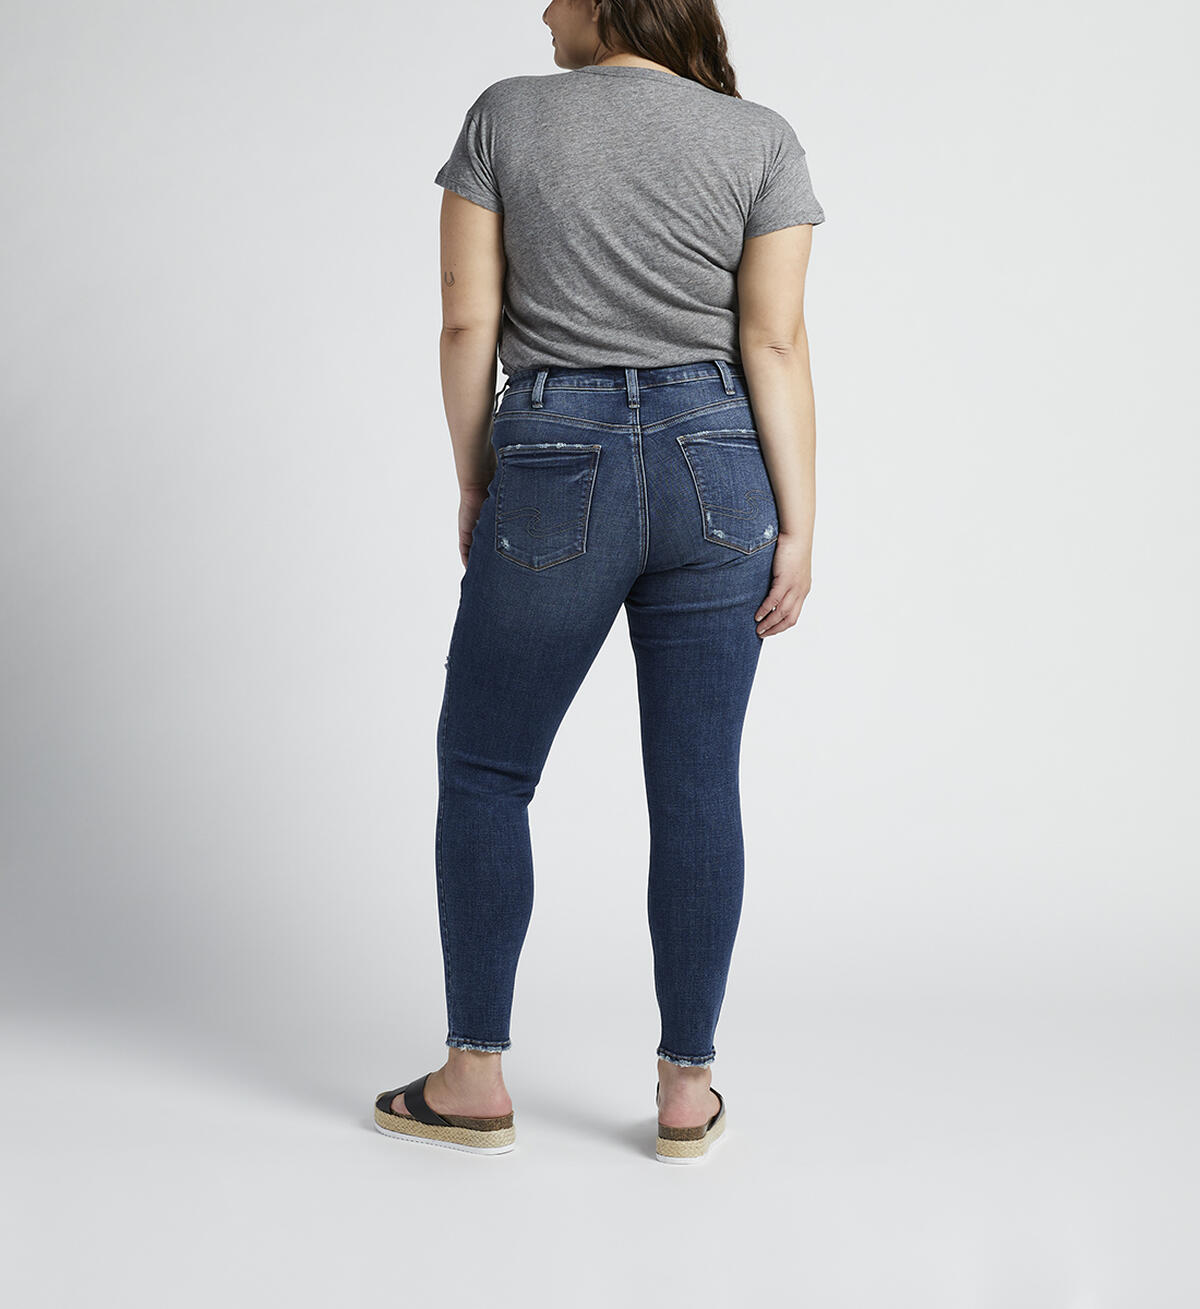 Avery High Rise Skinny Jeans Plus Size, , hi-res image number 1